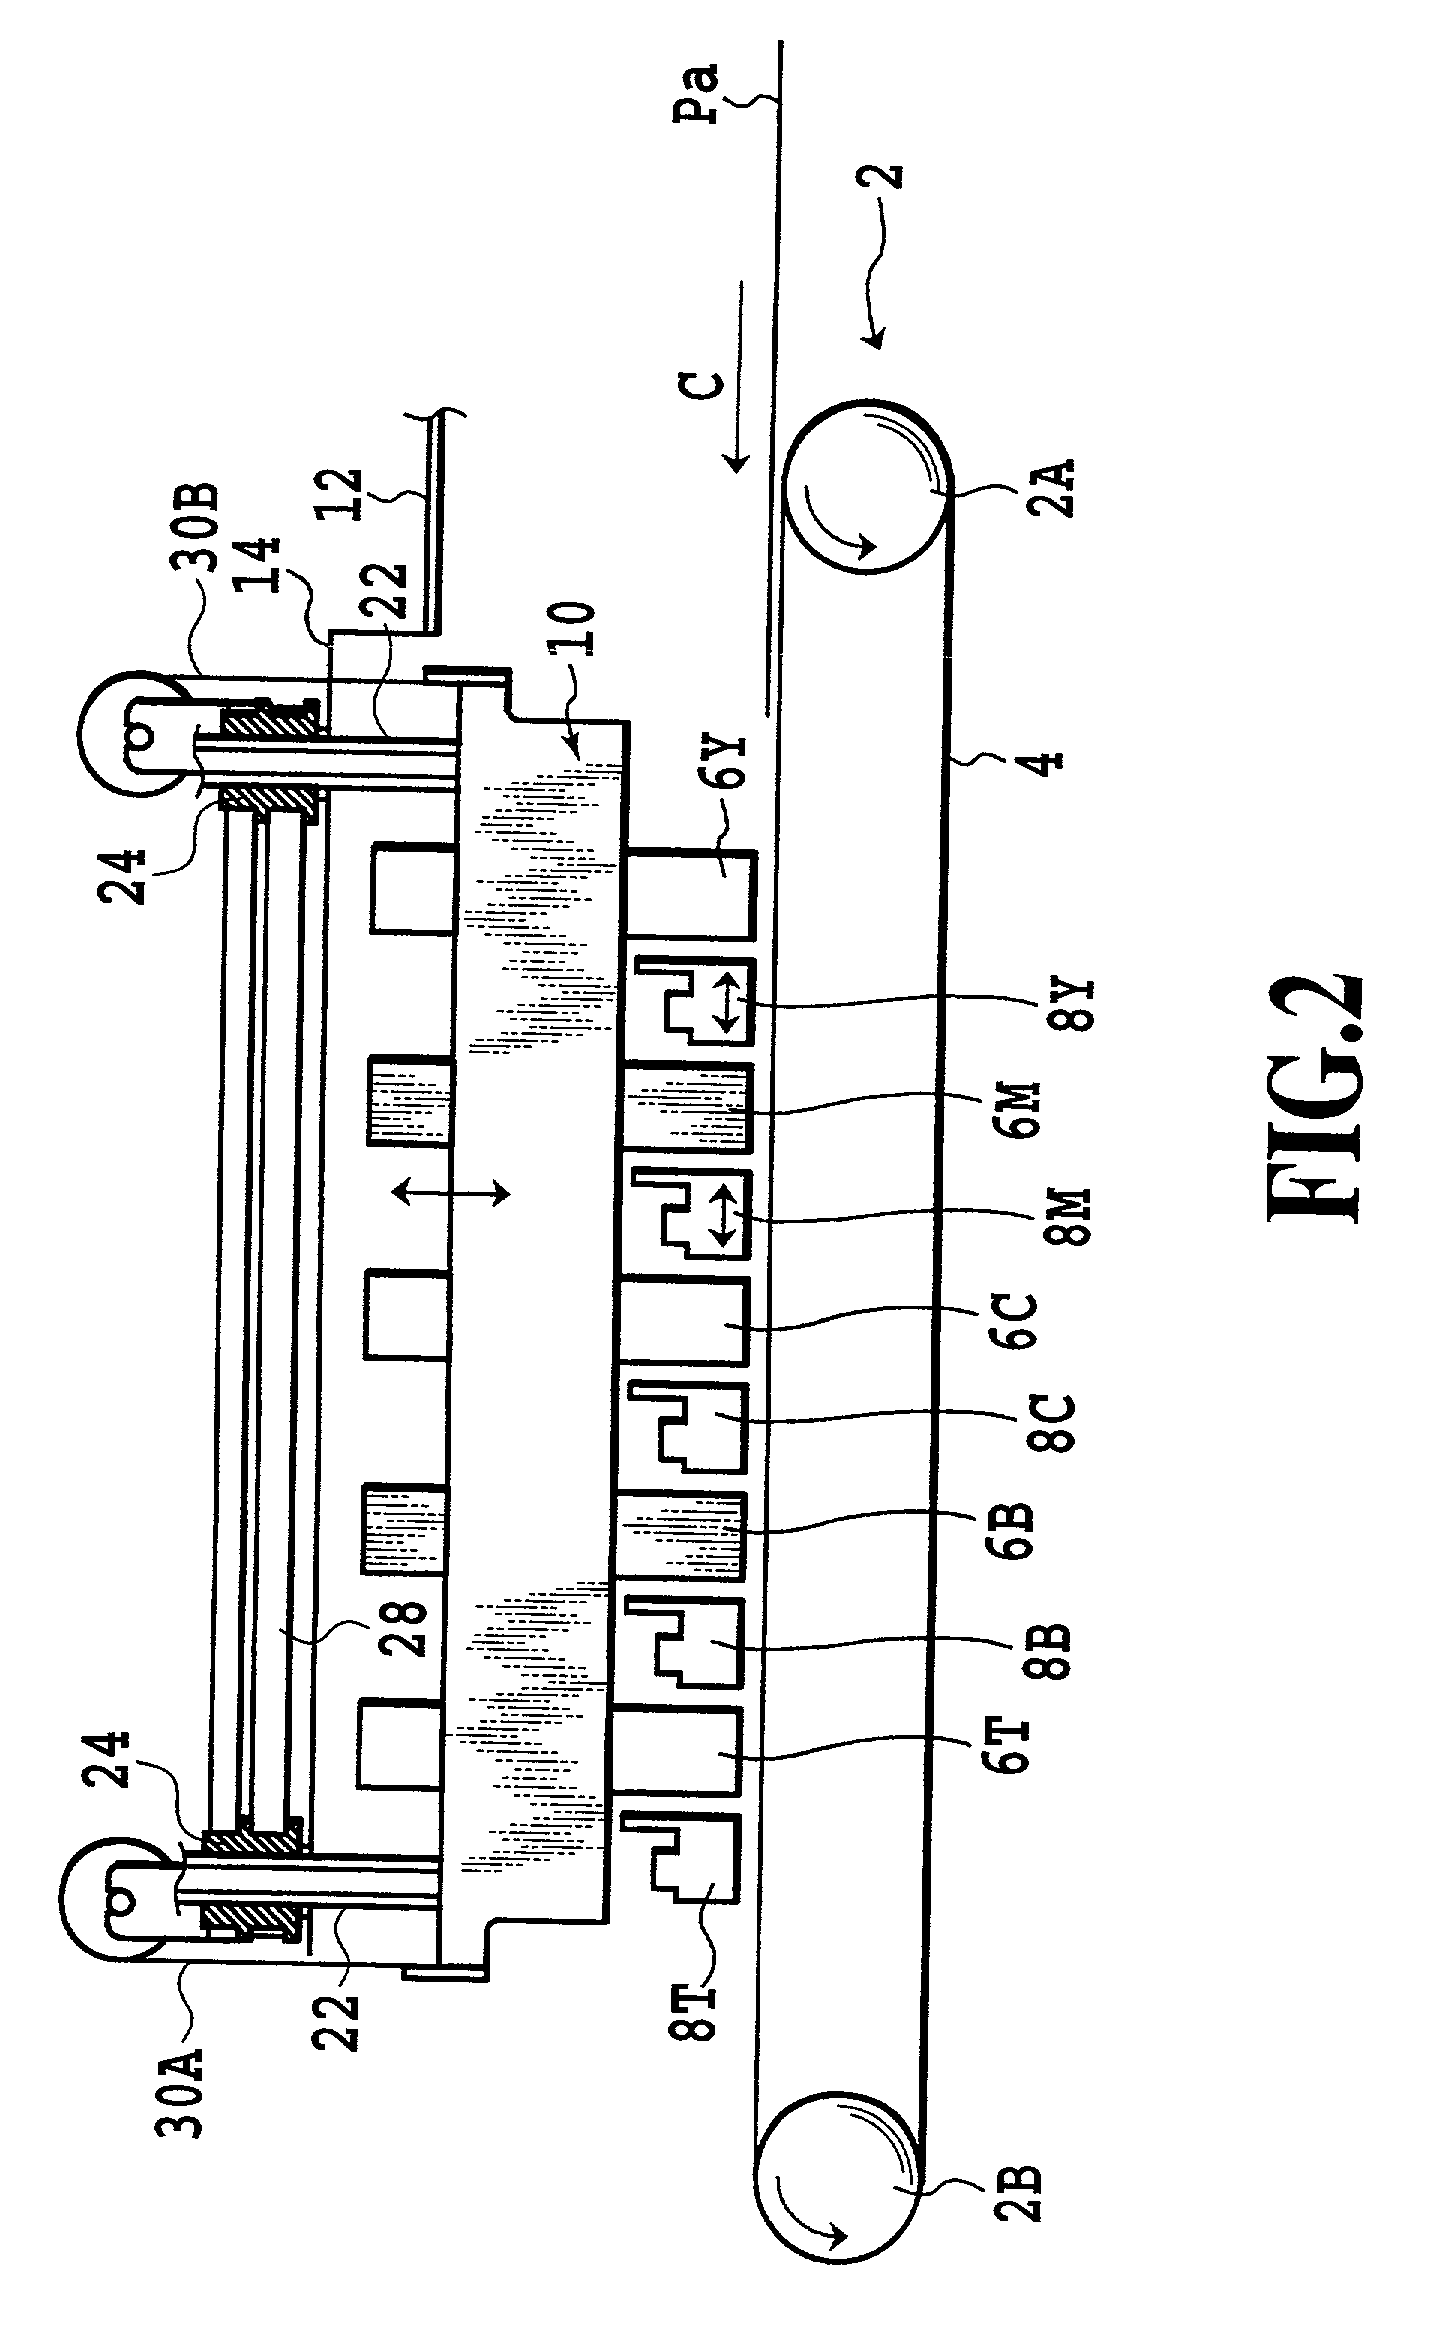 Moving up and down apparatus of print head, printing apparatus